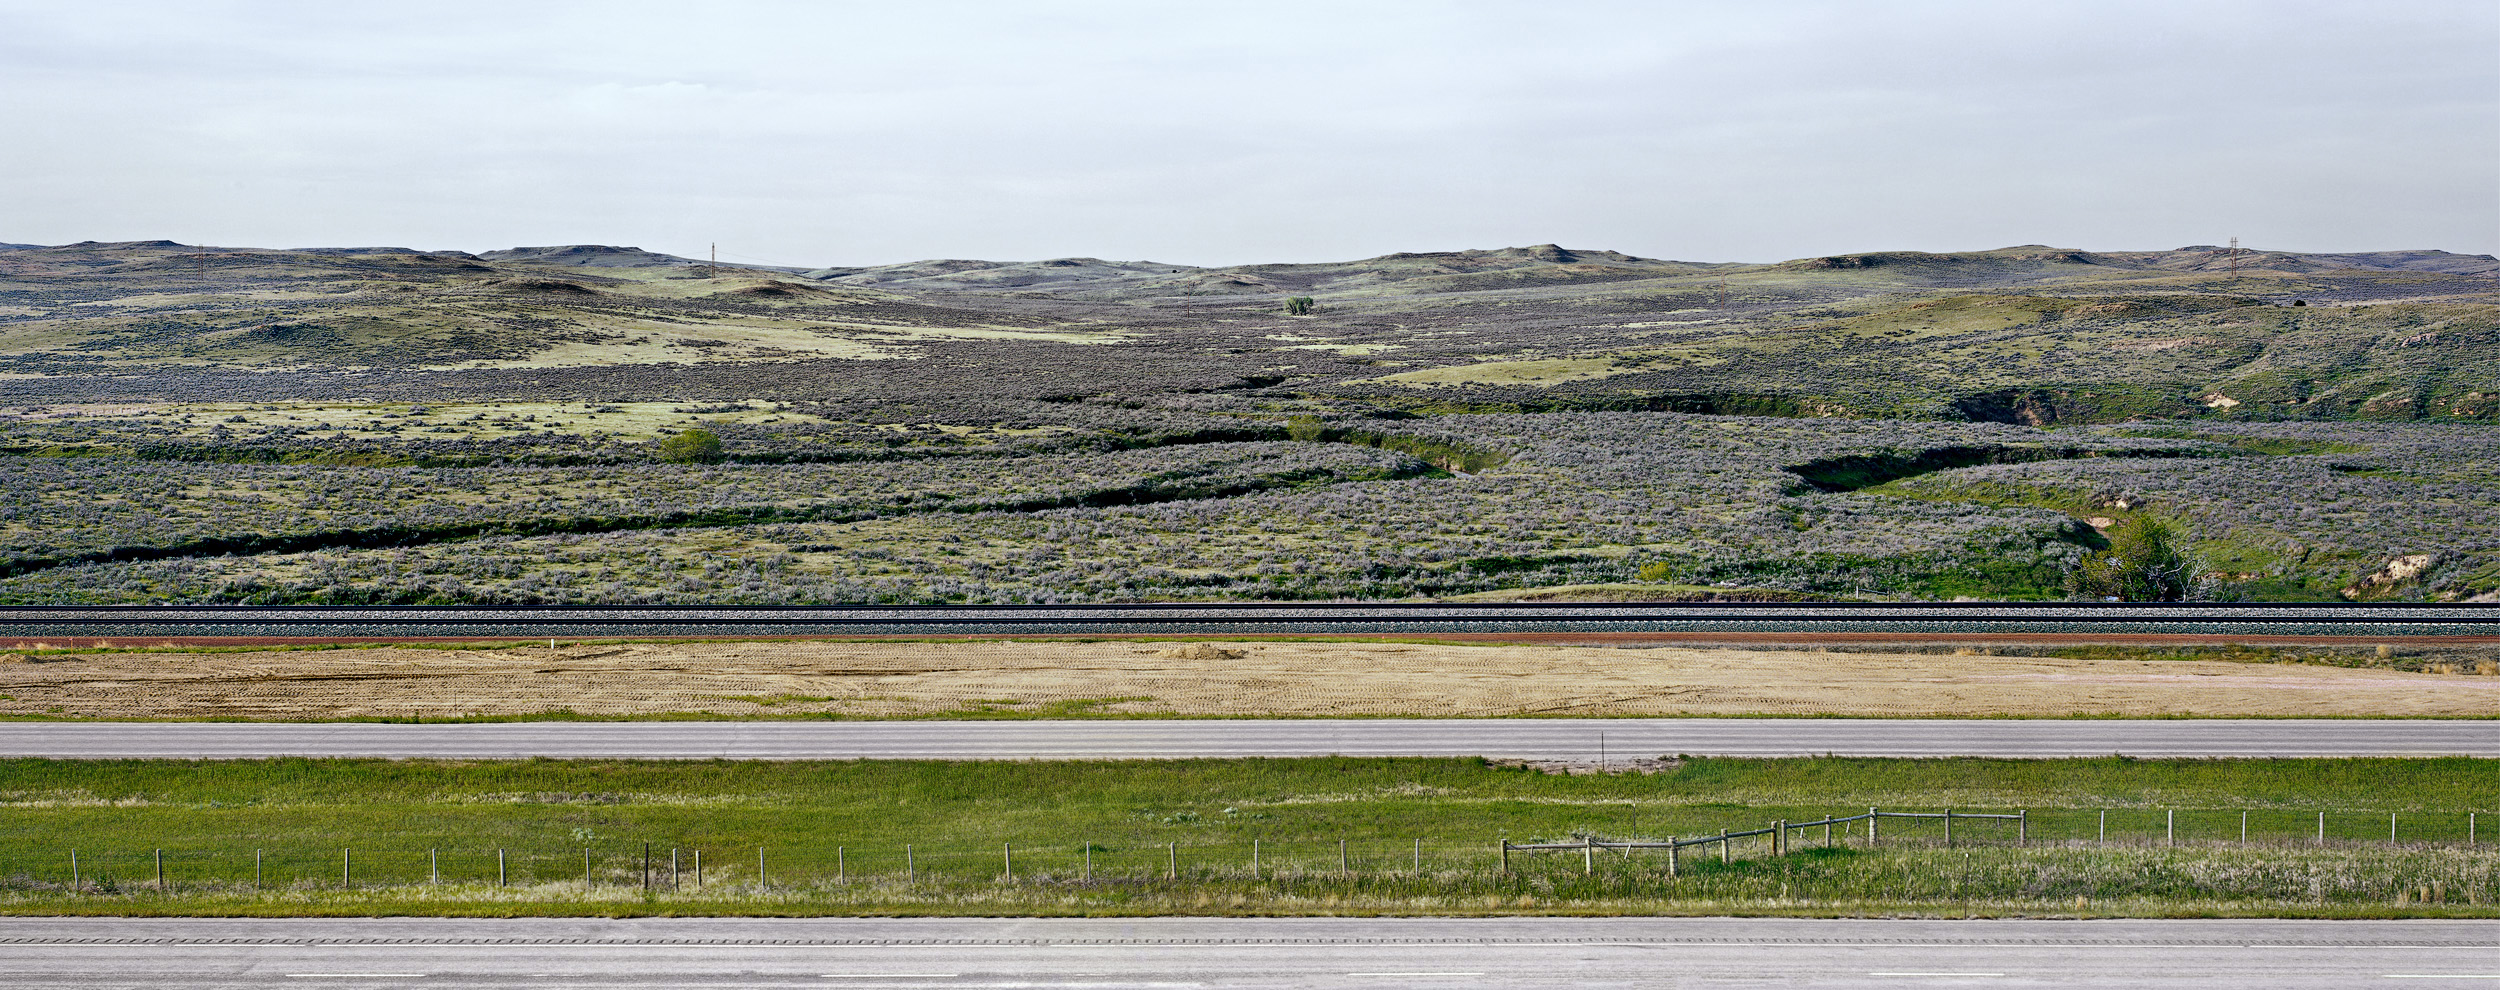 Interstate 90 and Tracks, Gillette, Wyoming